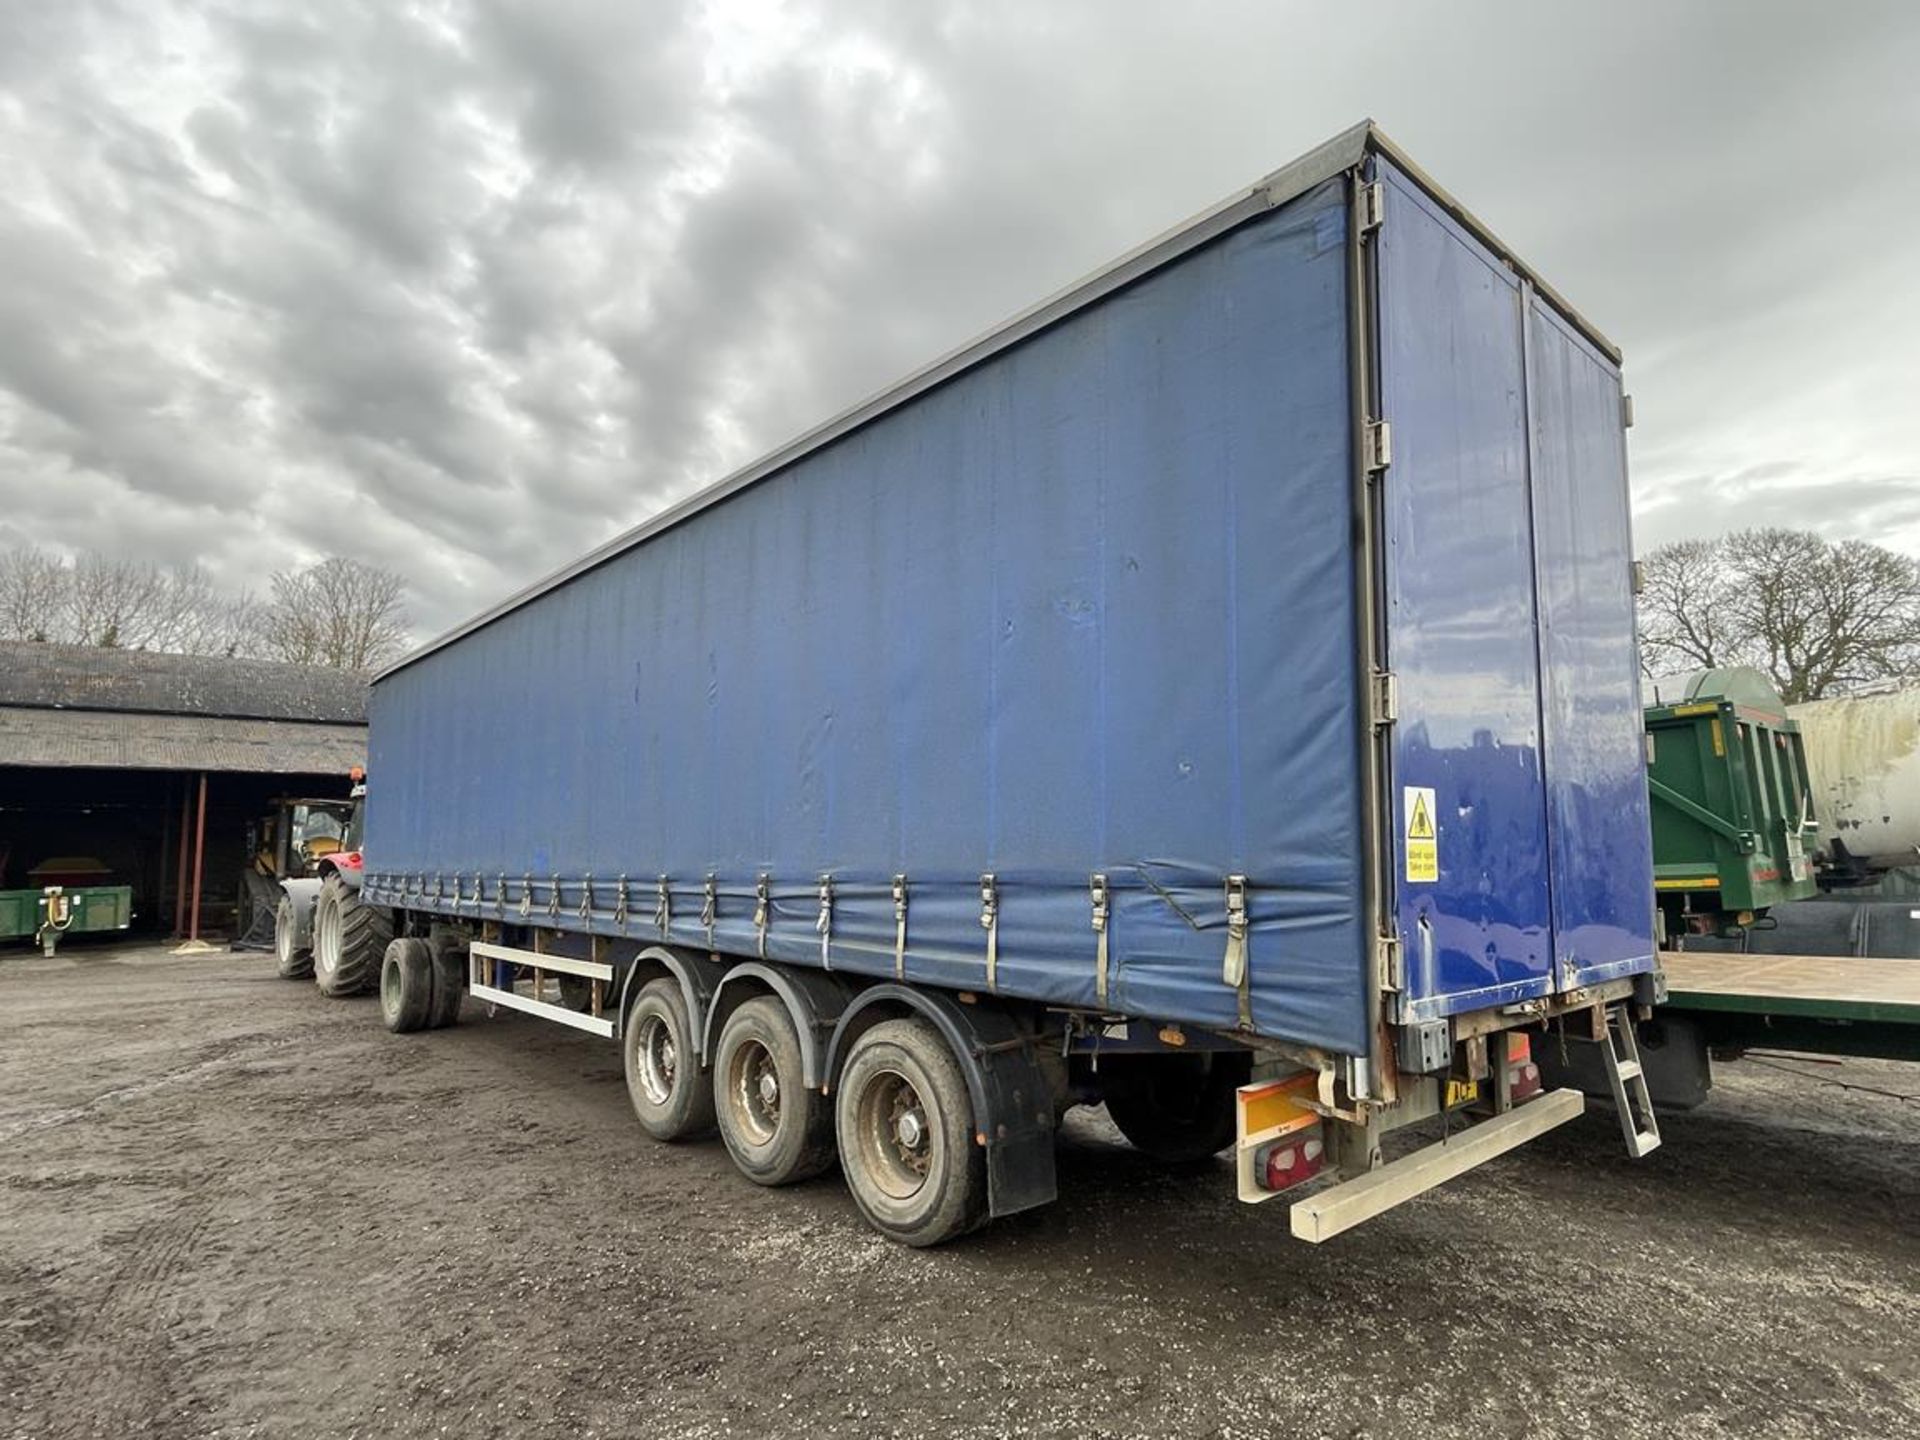 2006 Montracon EB+ ADR 25/2M Triple Axle Curtainside Trailer, VIN: 24688 with Rear Barn Doors. - Image 4 of 12